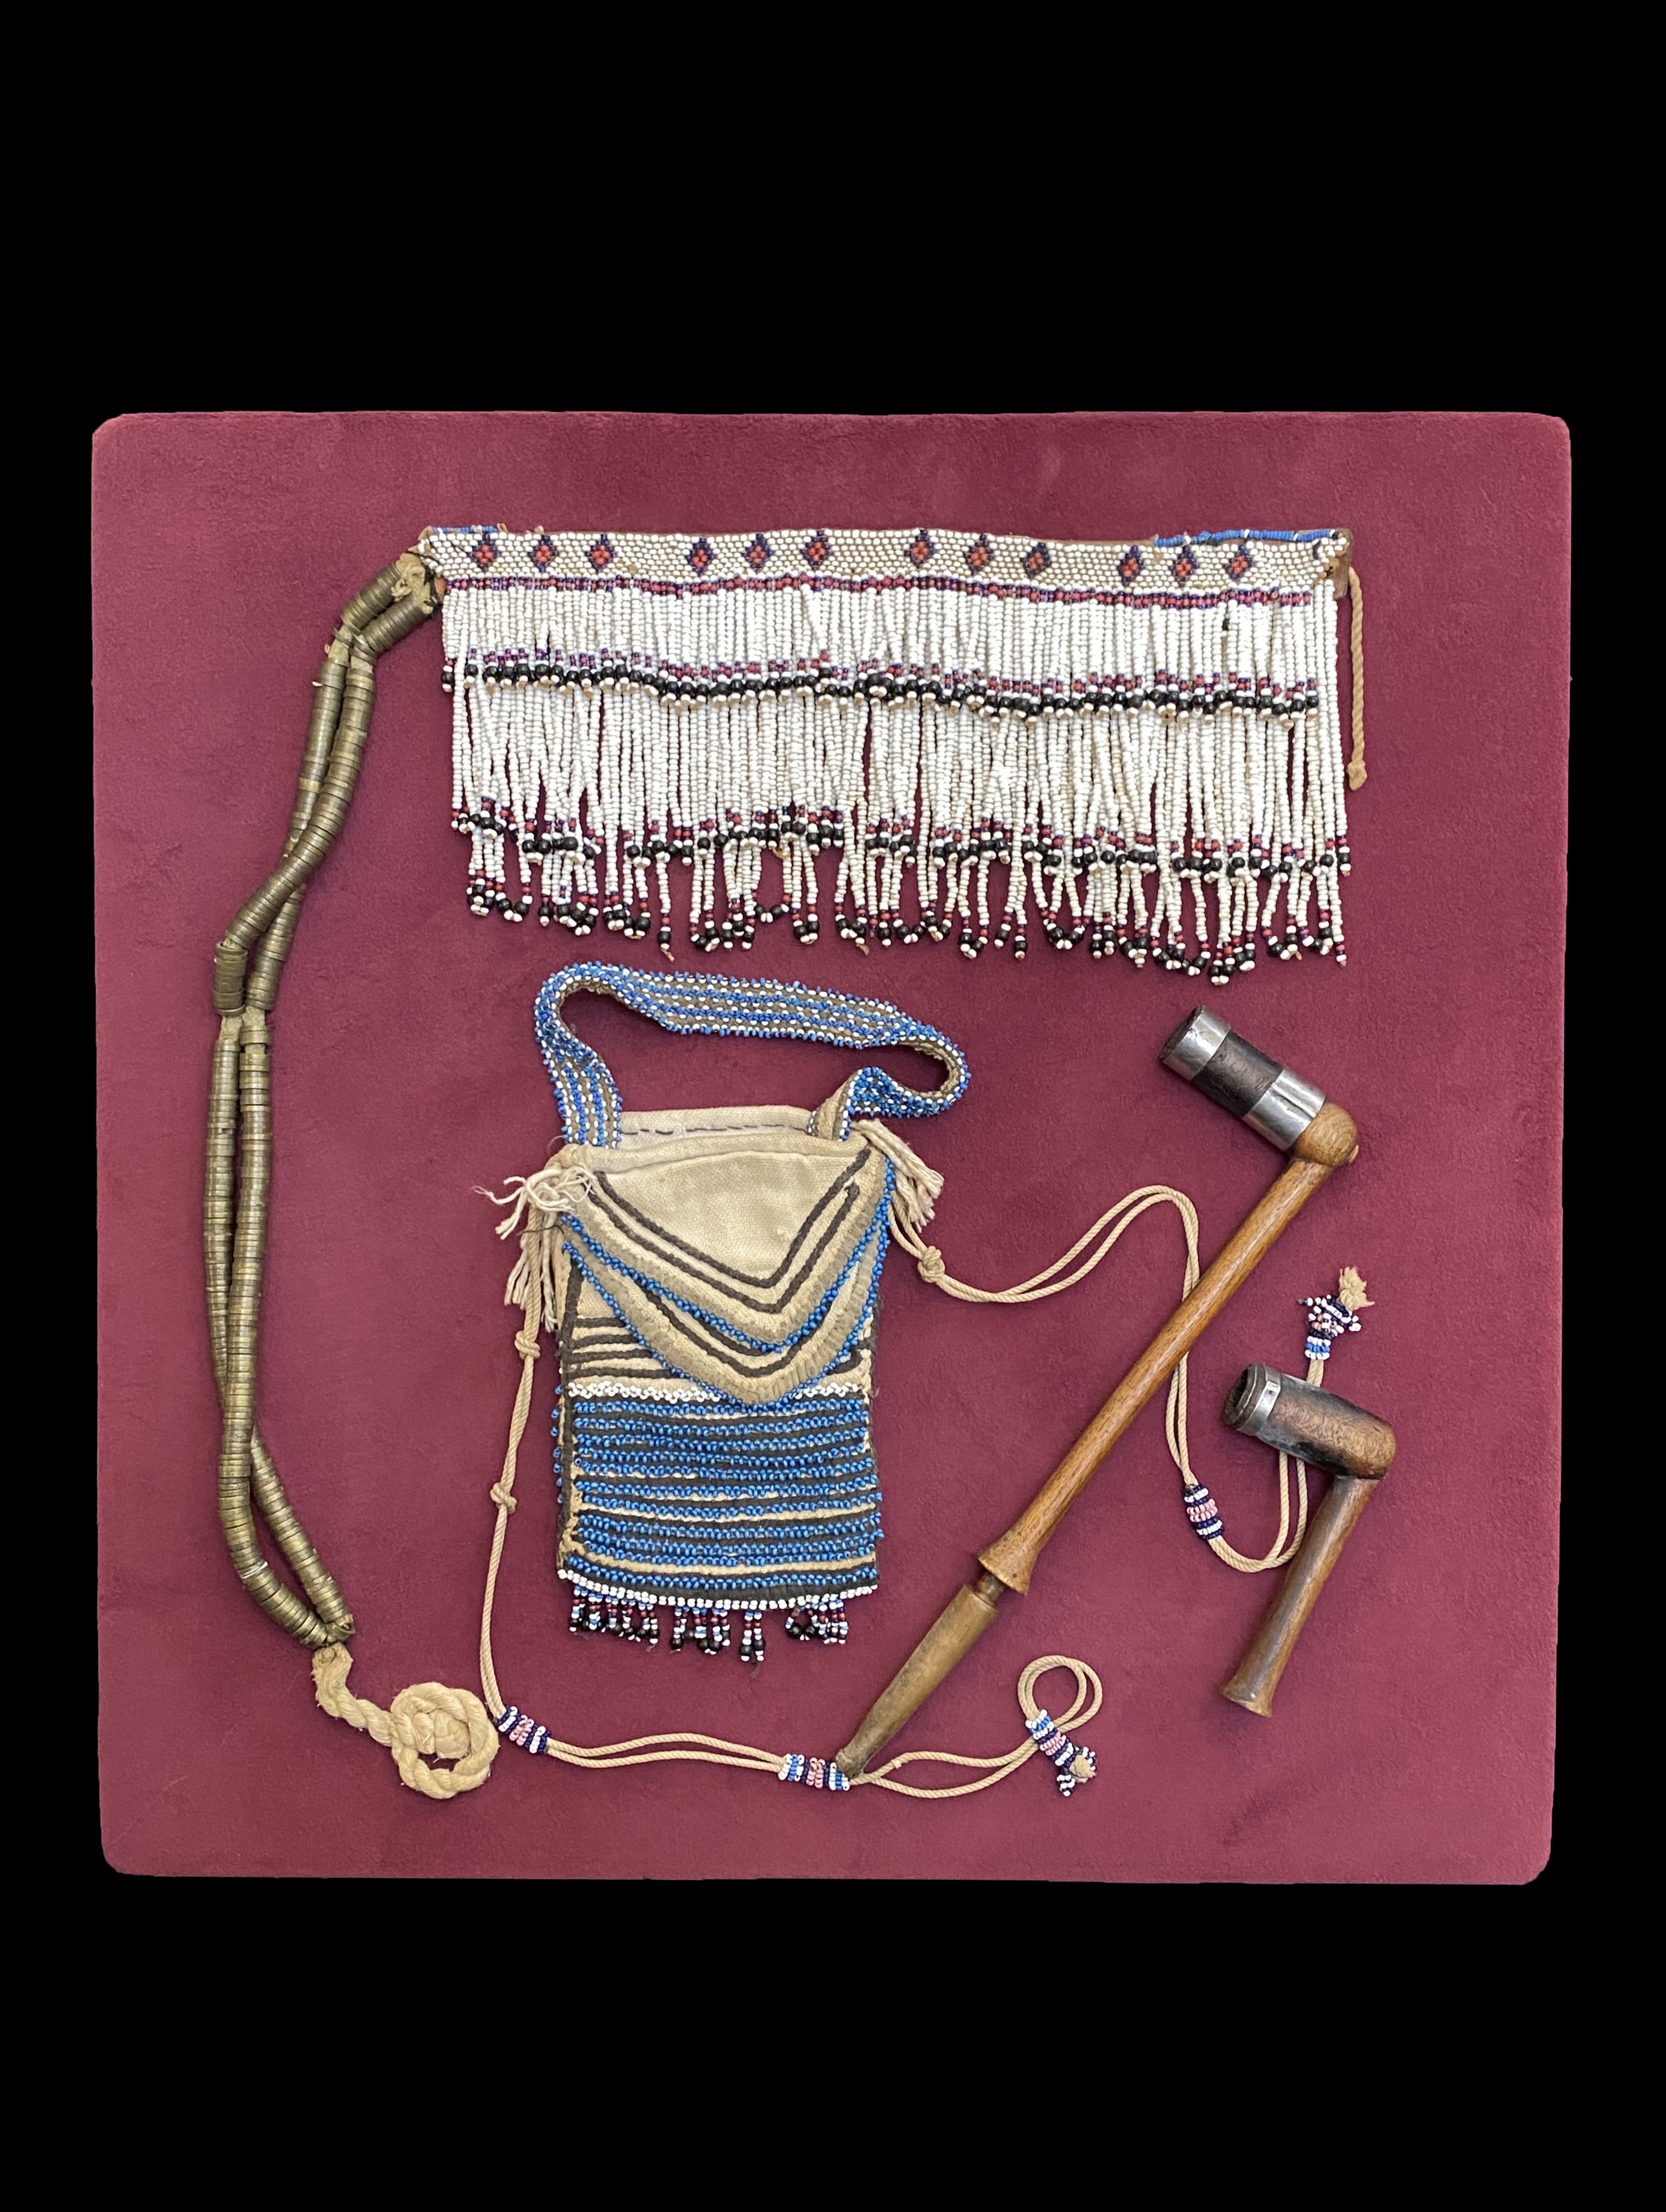 Mounted Collage of Xhosa Beadwork and Items - Xhosa People, South Africa (0043)